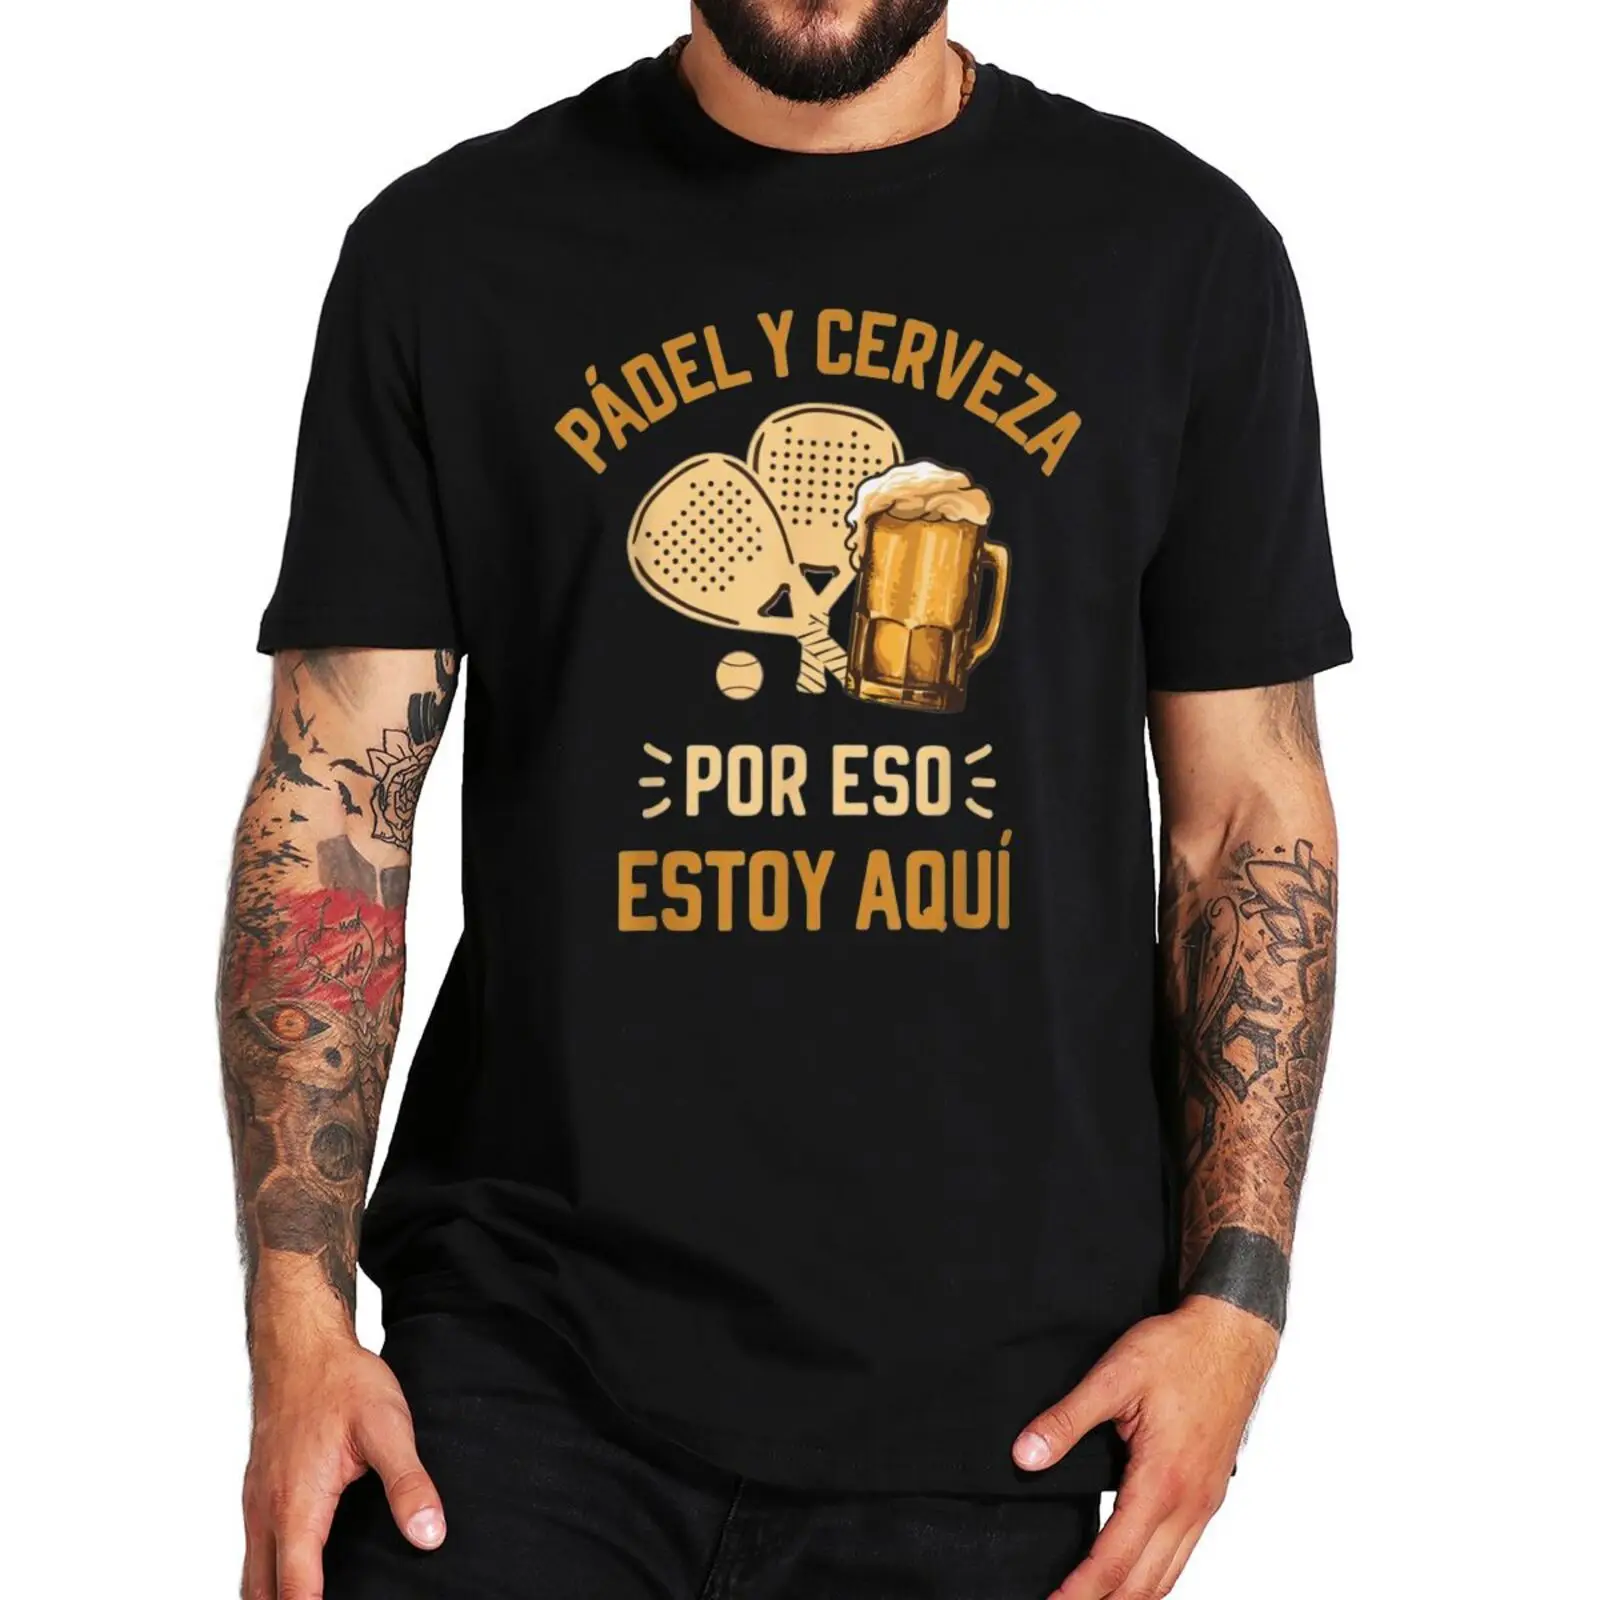 

Padel And Beer That's Why I'm Here T-shirt Funny Beer Padel Tennis Fans Vintage T-shirts Casual Summer Cotton Men Clothing